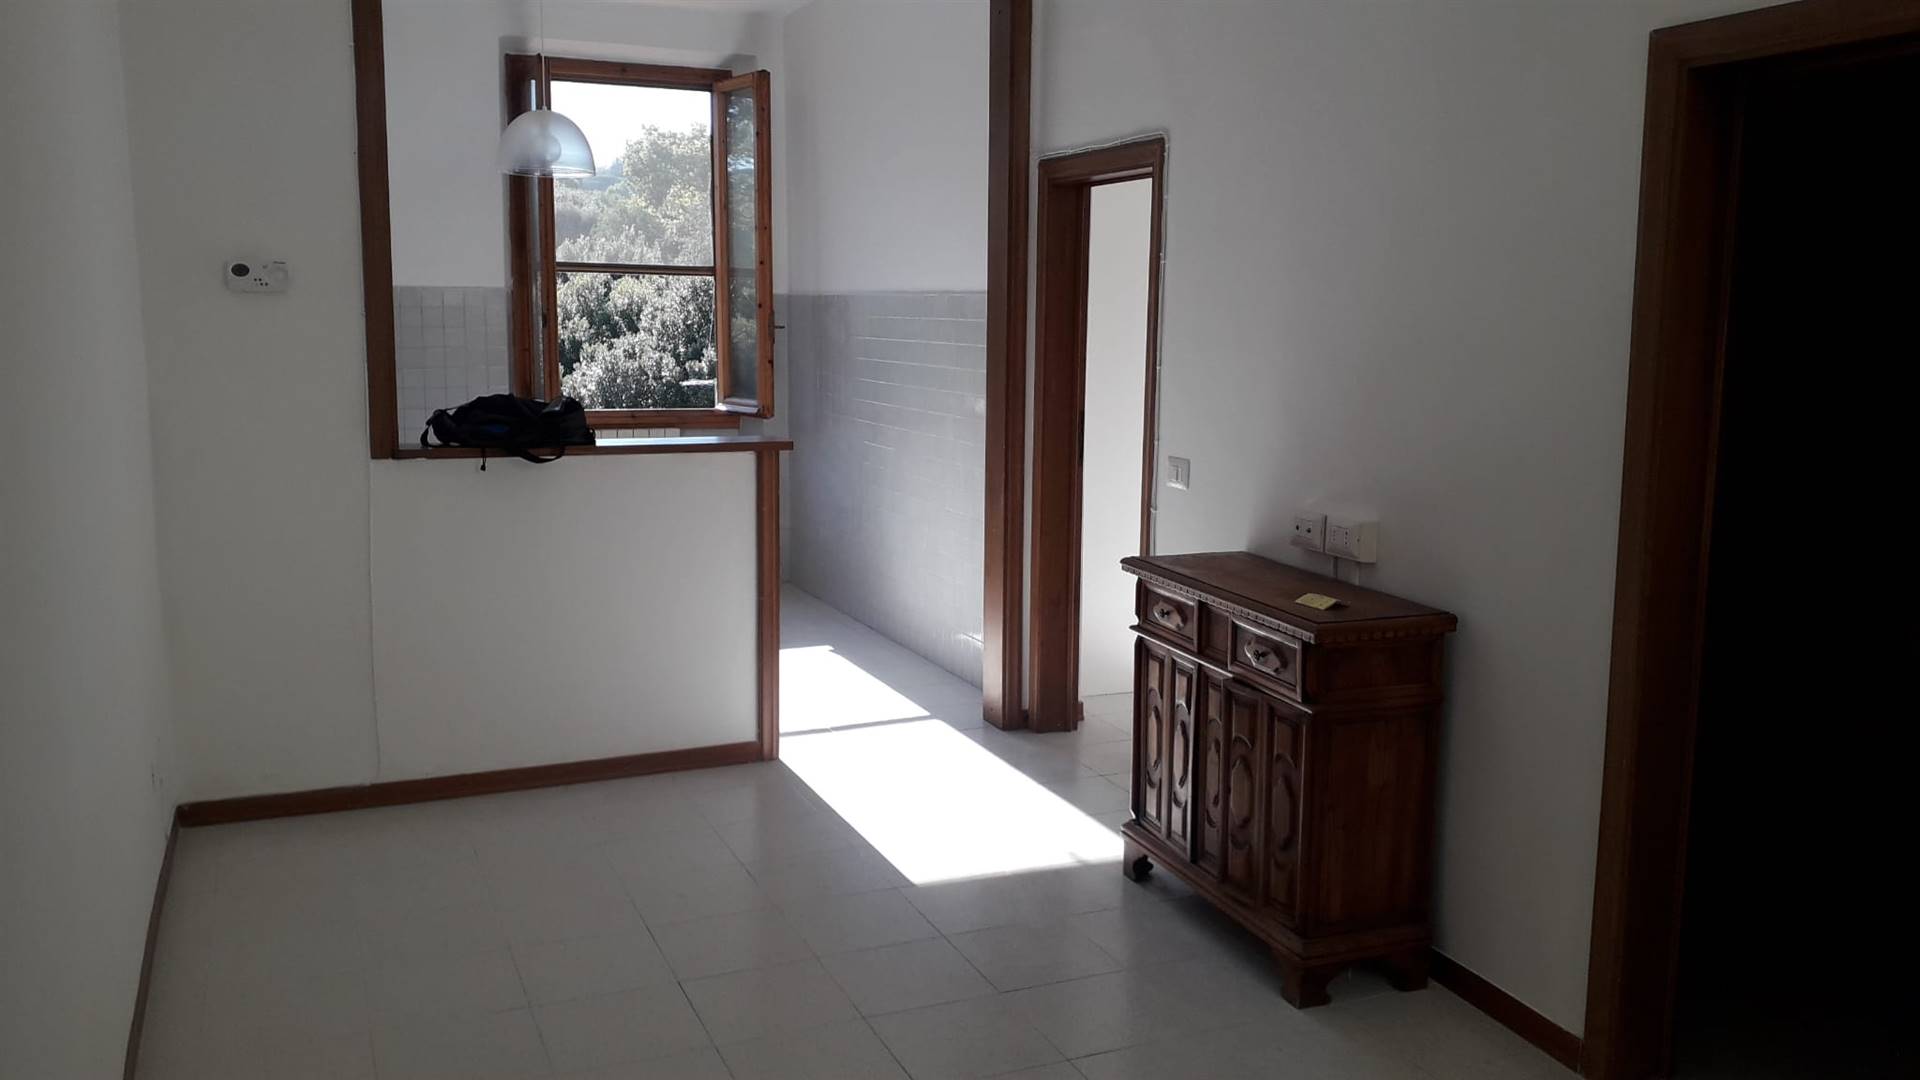 PORTA ROMANA, FIRENZE, Apartment for rent of 70 Sq. mt., Good condition, Heating Individual heating system, Energetic class: G, Epi: 230 kwh/m2 year, 